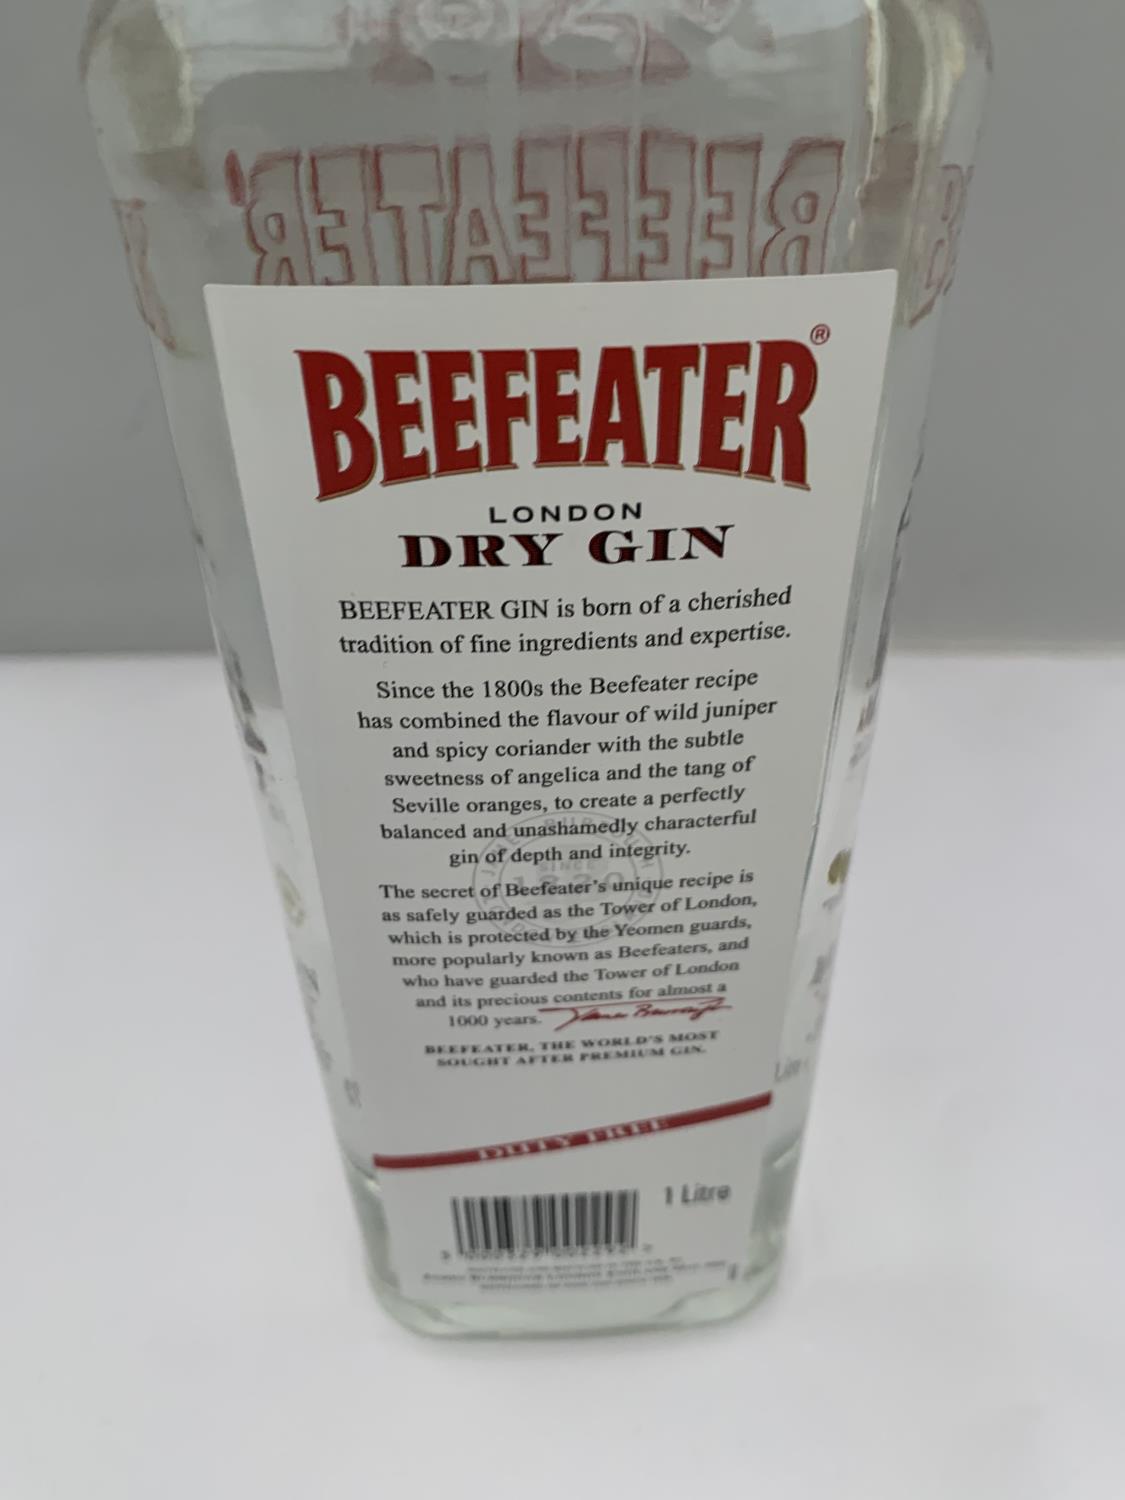 A 1 LITRE BEEFEATER LONDON DRY GIN 47% VOL - Image 3 of 3